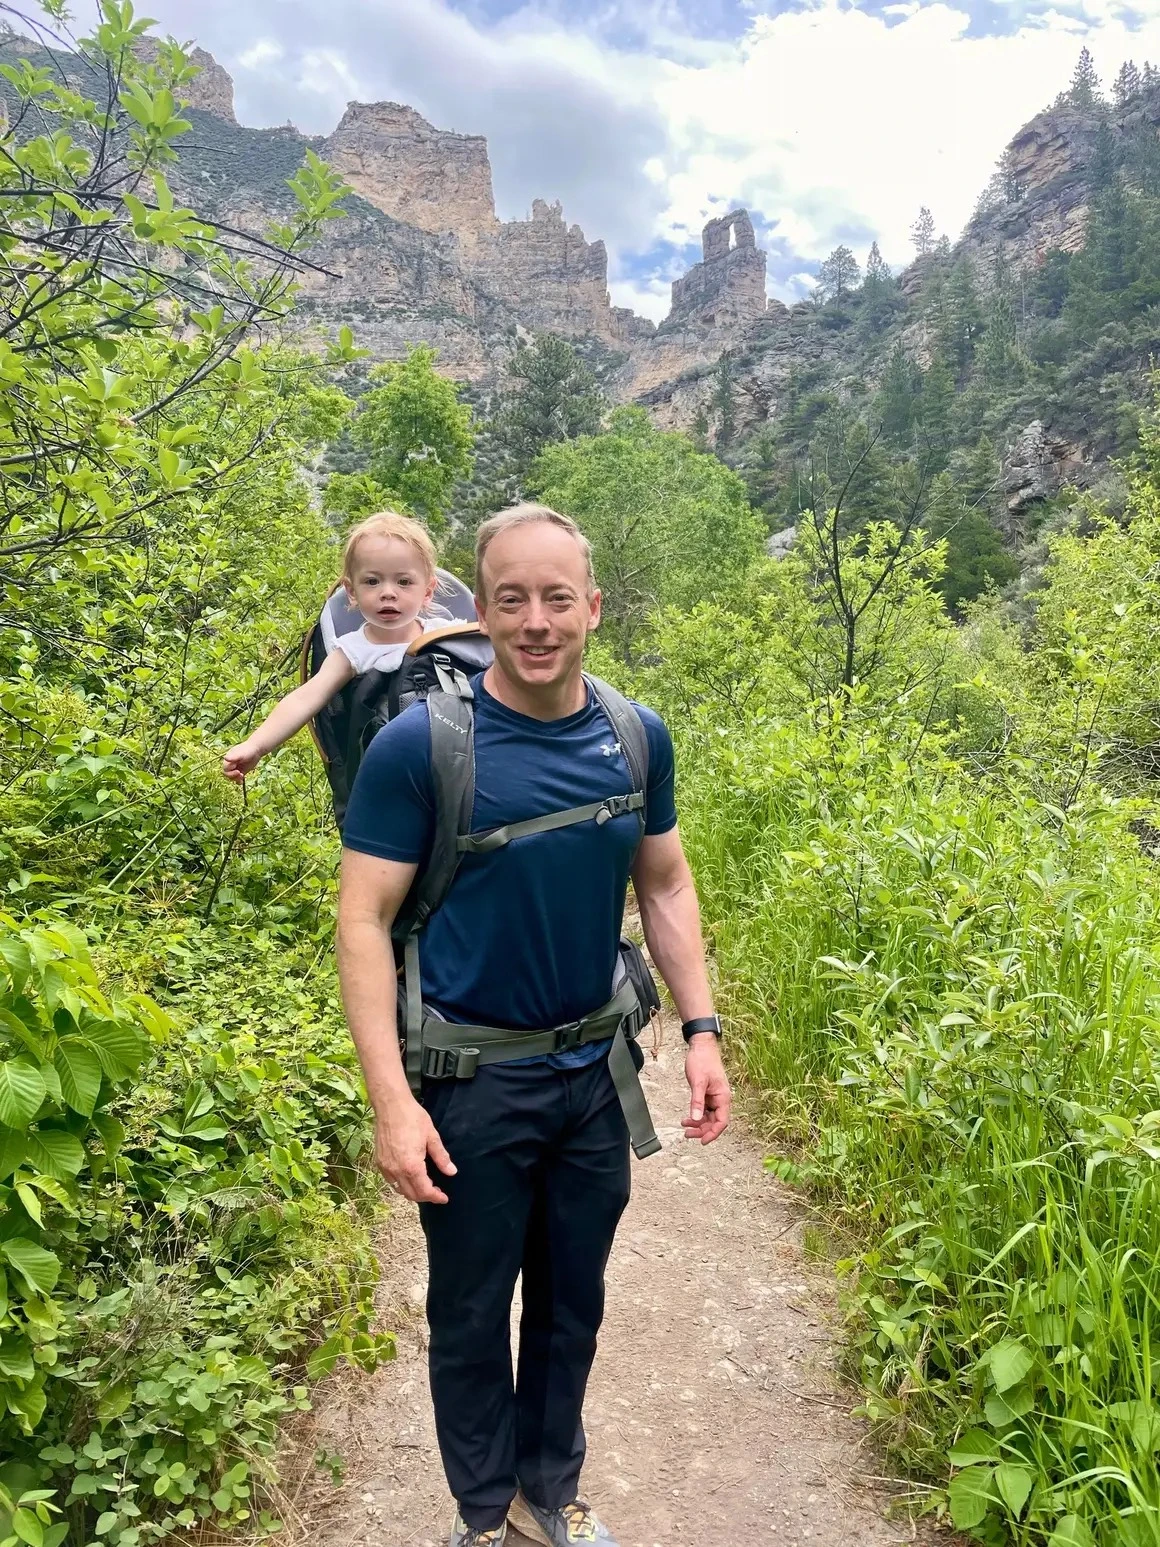 Kelly Johnson hiking through the mountains while carrying his daughter